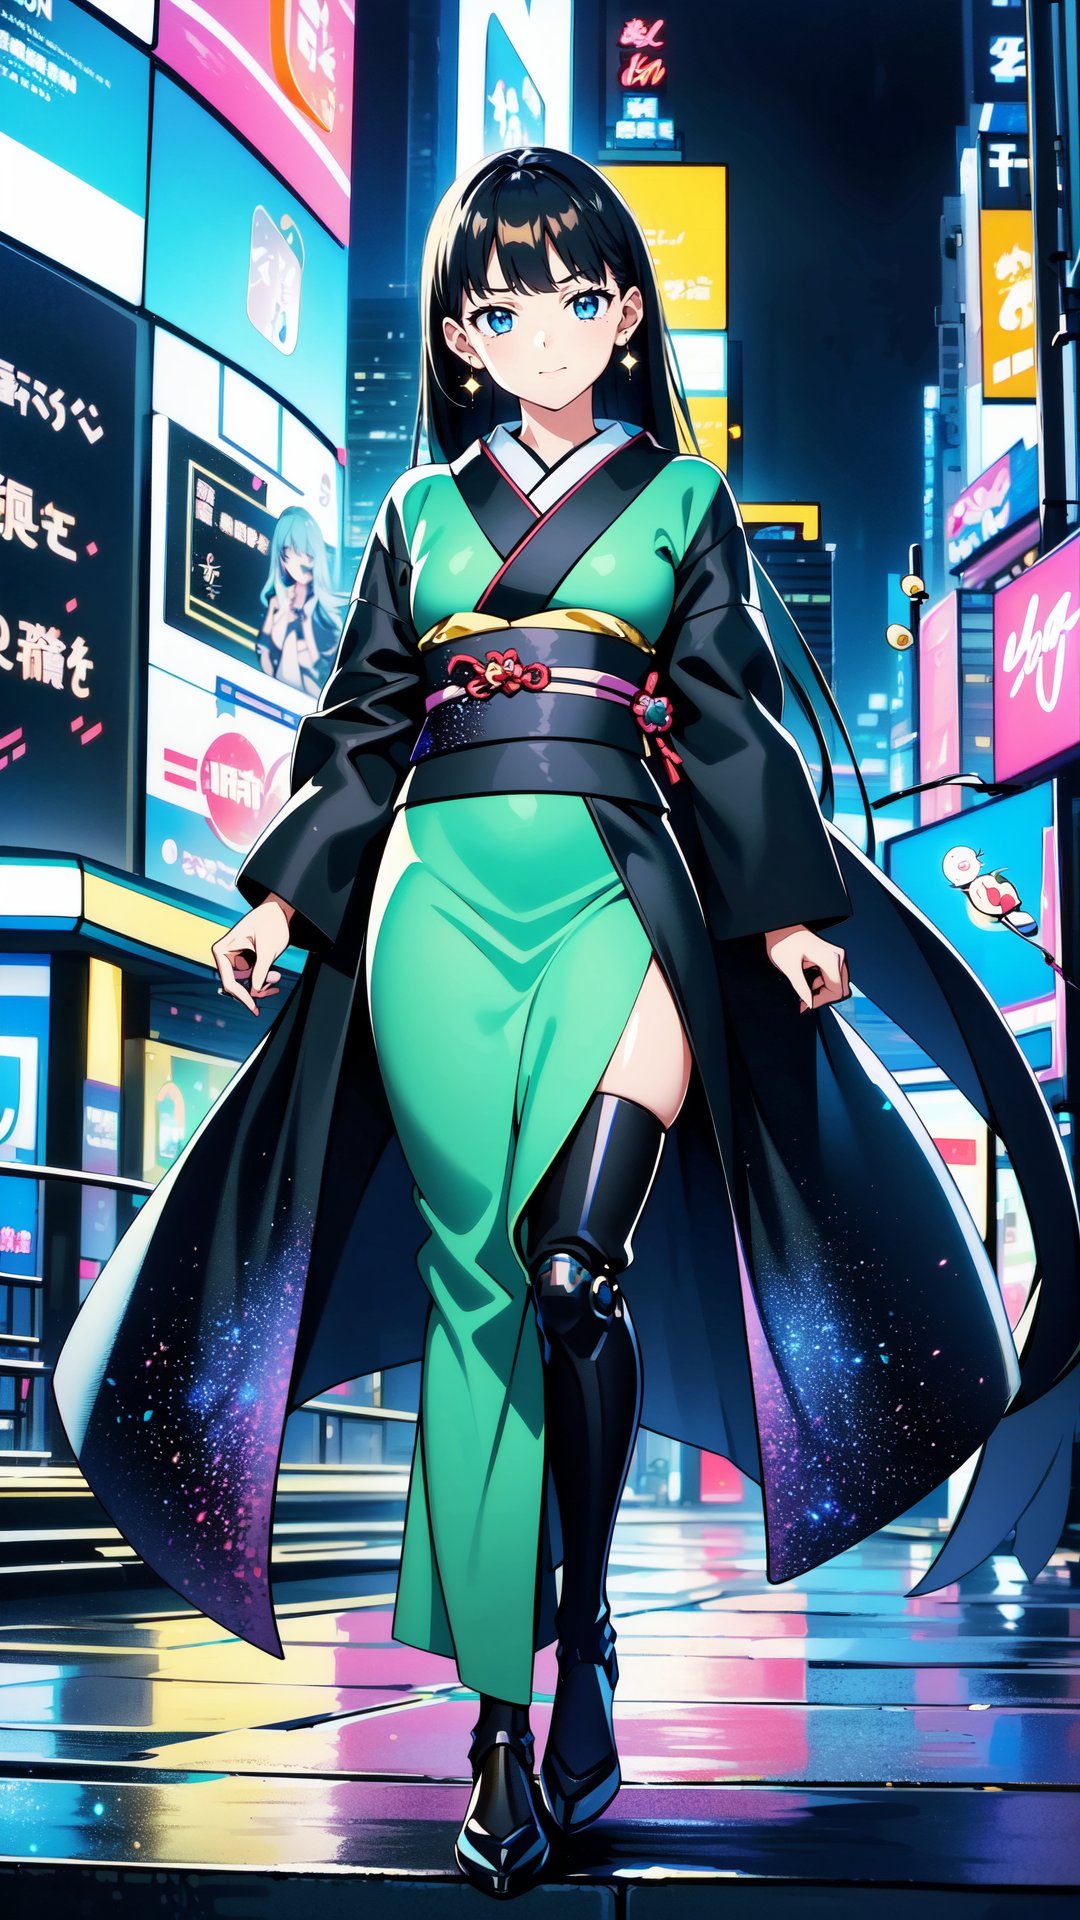 (fashion show theme:1.3), (New York Fashion Week:1.3), (Night Times Square Garden:1.3), full body portrait of a extremely stunnig pretty and beautiful female android, 22yo, Japanese German, Indian Beauty, (mecha musume), (she has a mechanical cyber body, mechanical arms, and mechanical legs), wearing a (fusion of kimono dress and gothic lolita:1.3), perfect face, K-pop girl loli face, perfect eyes, black straight long hair, hime-cut bangs, HD details, high details, sharp focus, studio photo, HD makeup, shimmery makeup, celebrity makeup, ((centered image)), (HD render)Studio portrait, magic, magical, fantasy, light grin smile, Extremely Realistic, stylish moderl posing, she is walking on runway in the middle of the stage.,Cyberpunk,Matrix